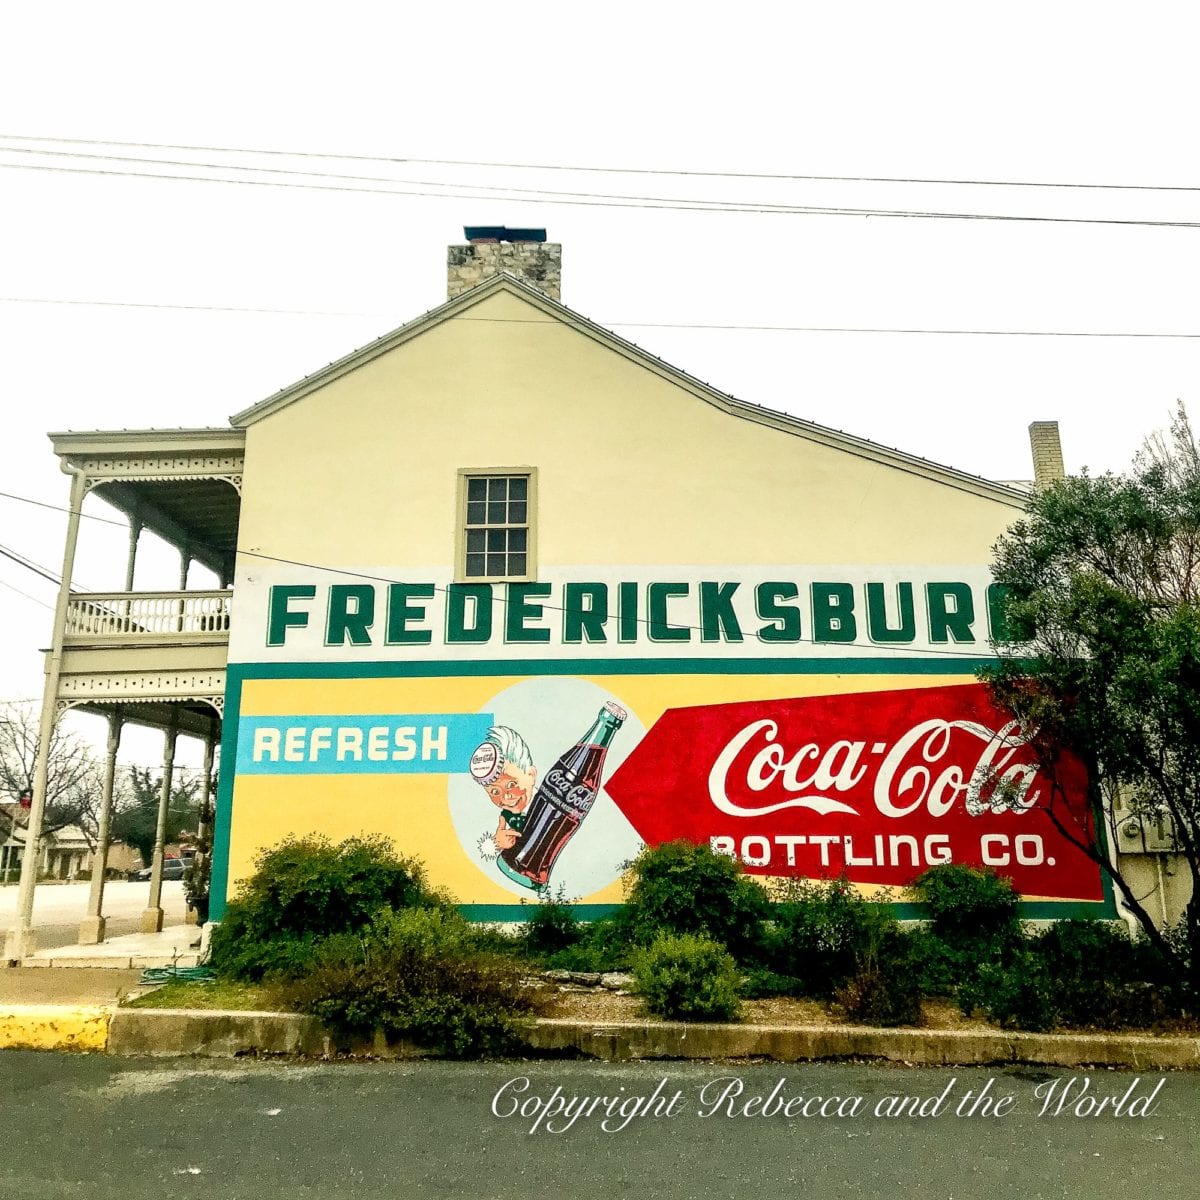 Fredericksburg, TX, is a great place in the Texas Hill Country for a weekend getaway